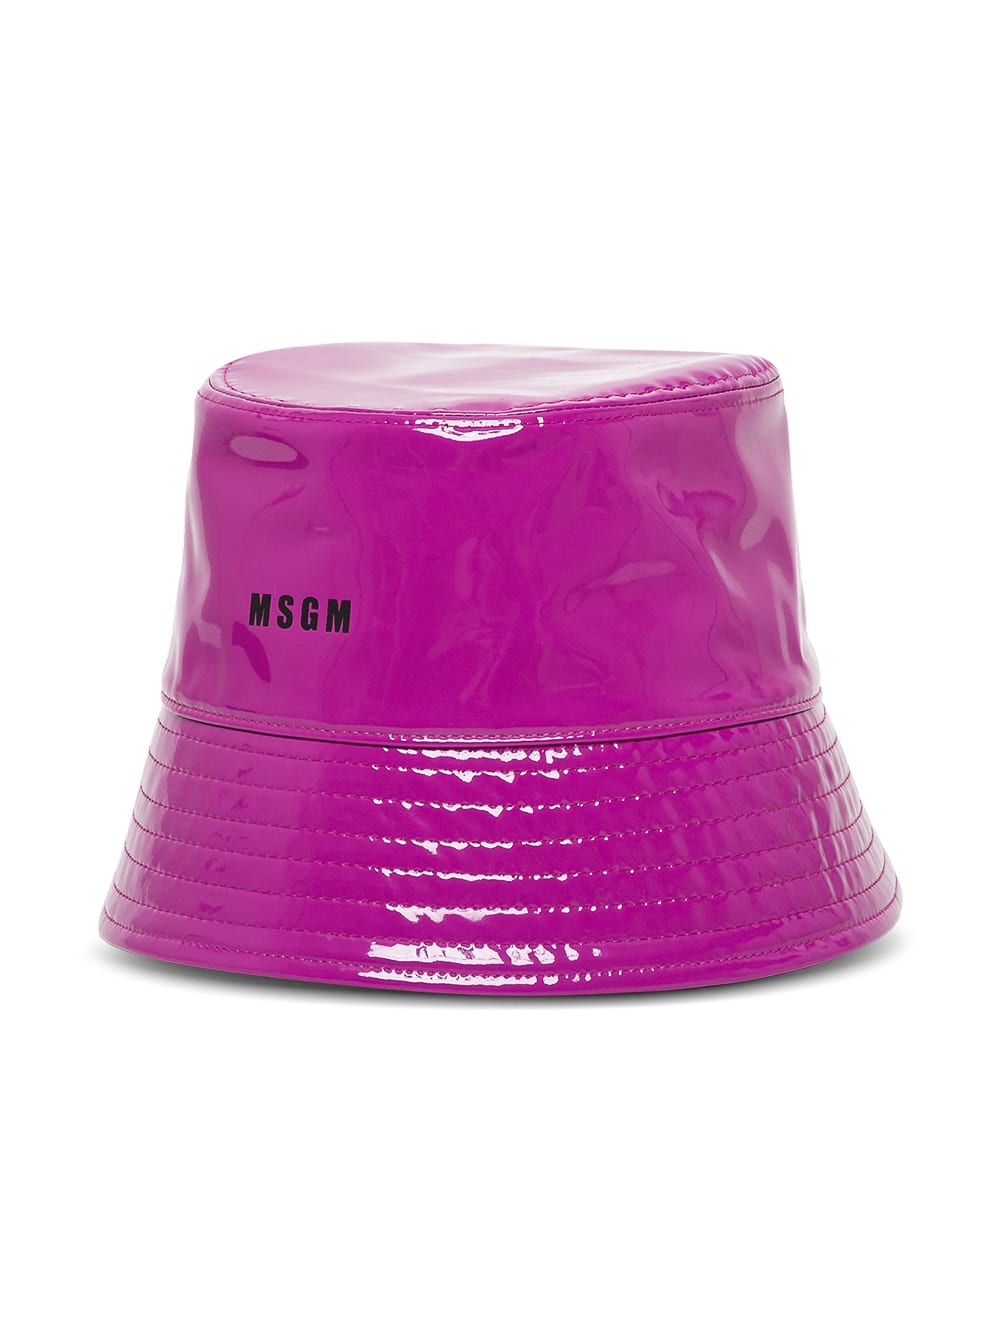 MSGM PINK PATENT LEATHER BUCKET HAT WITH LOGO,3142MDL10121780372